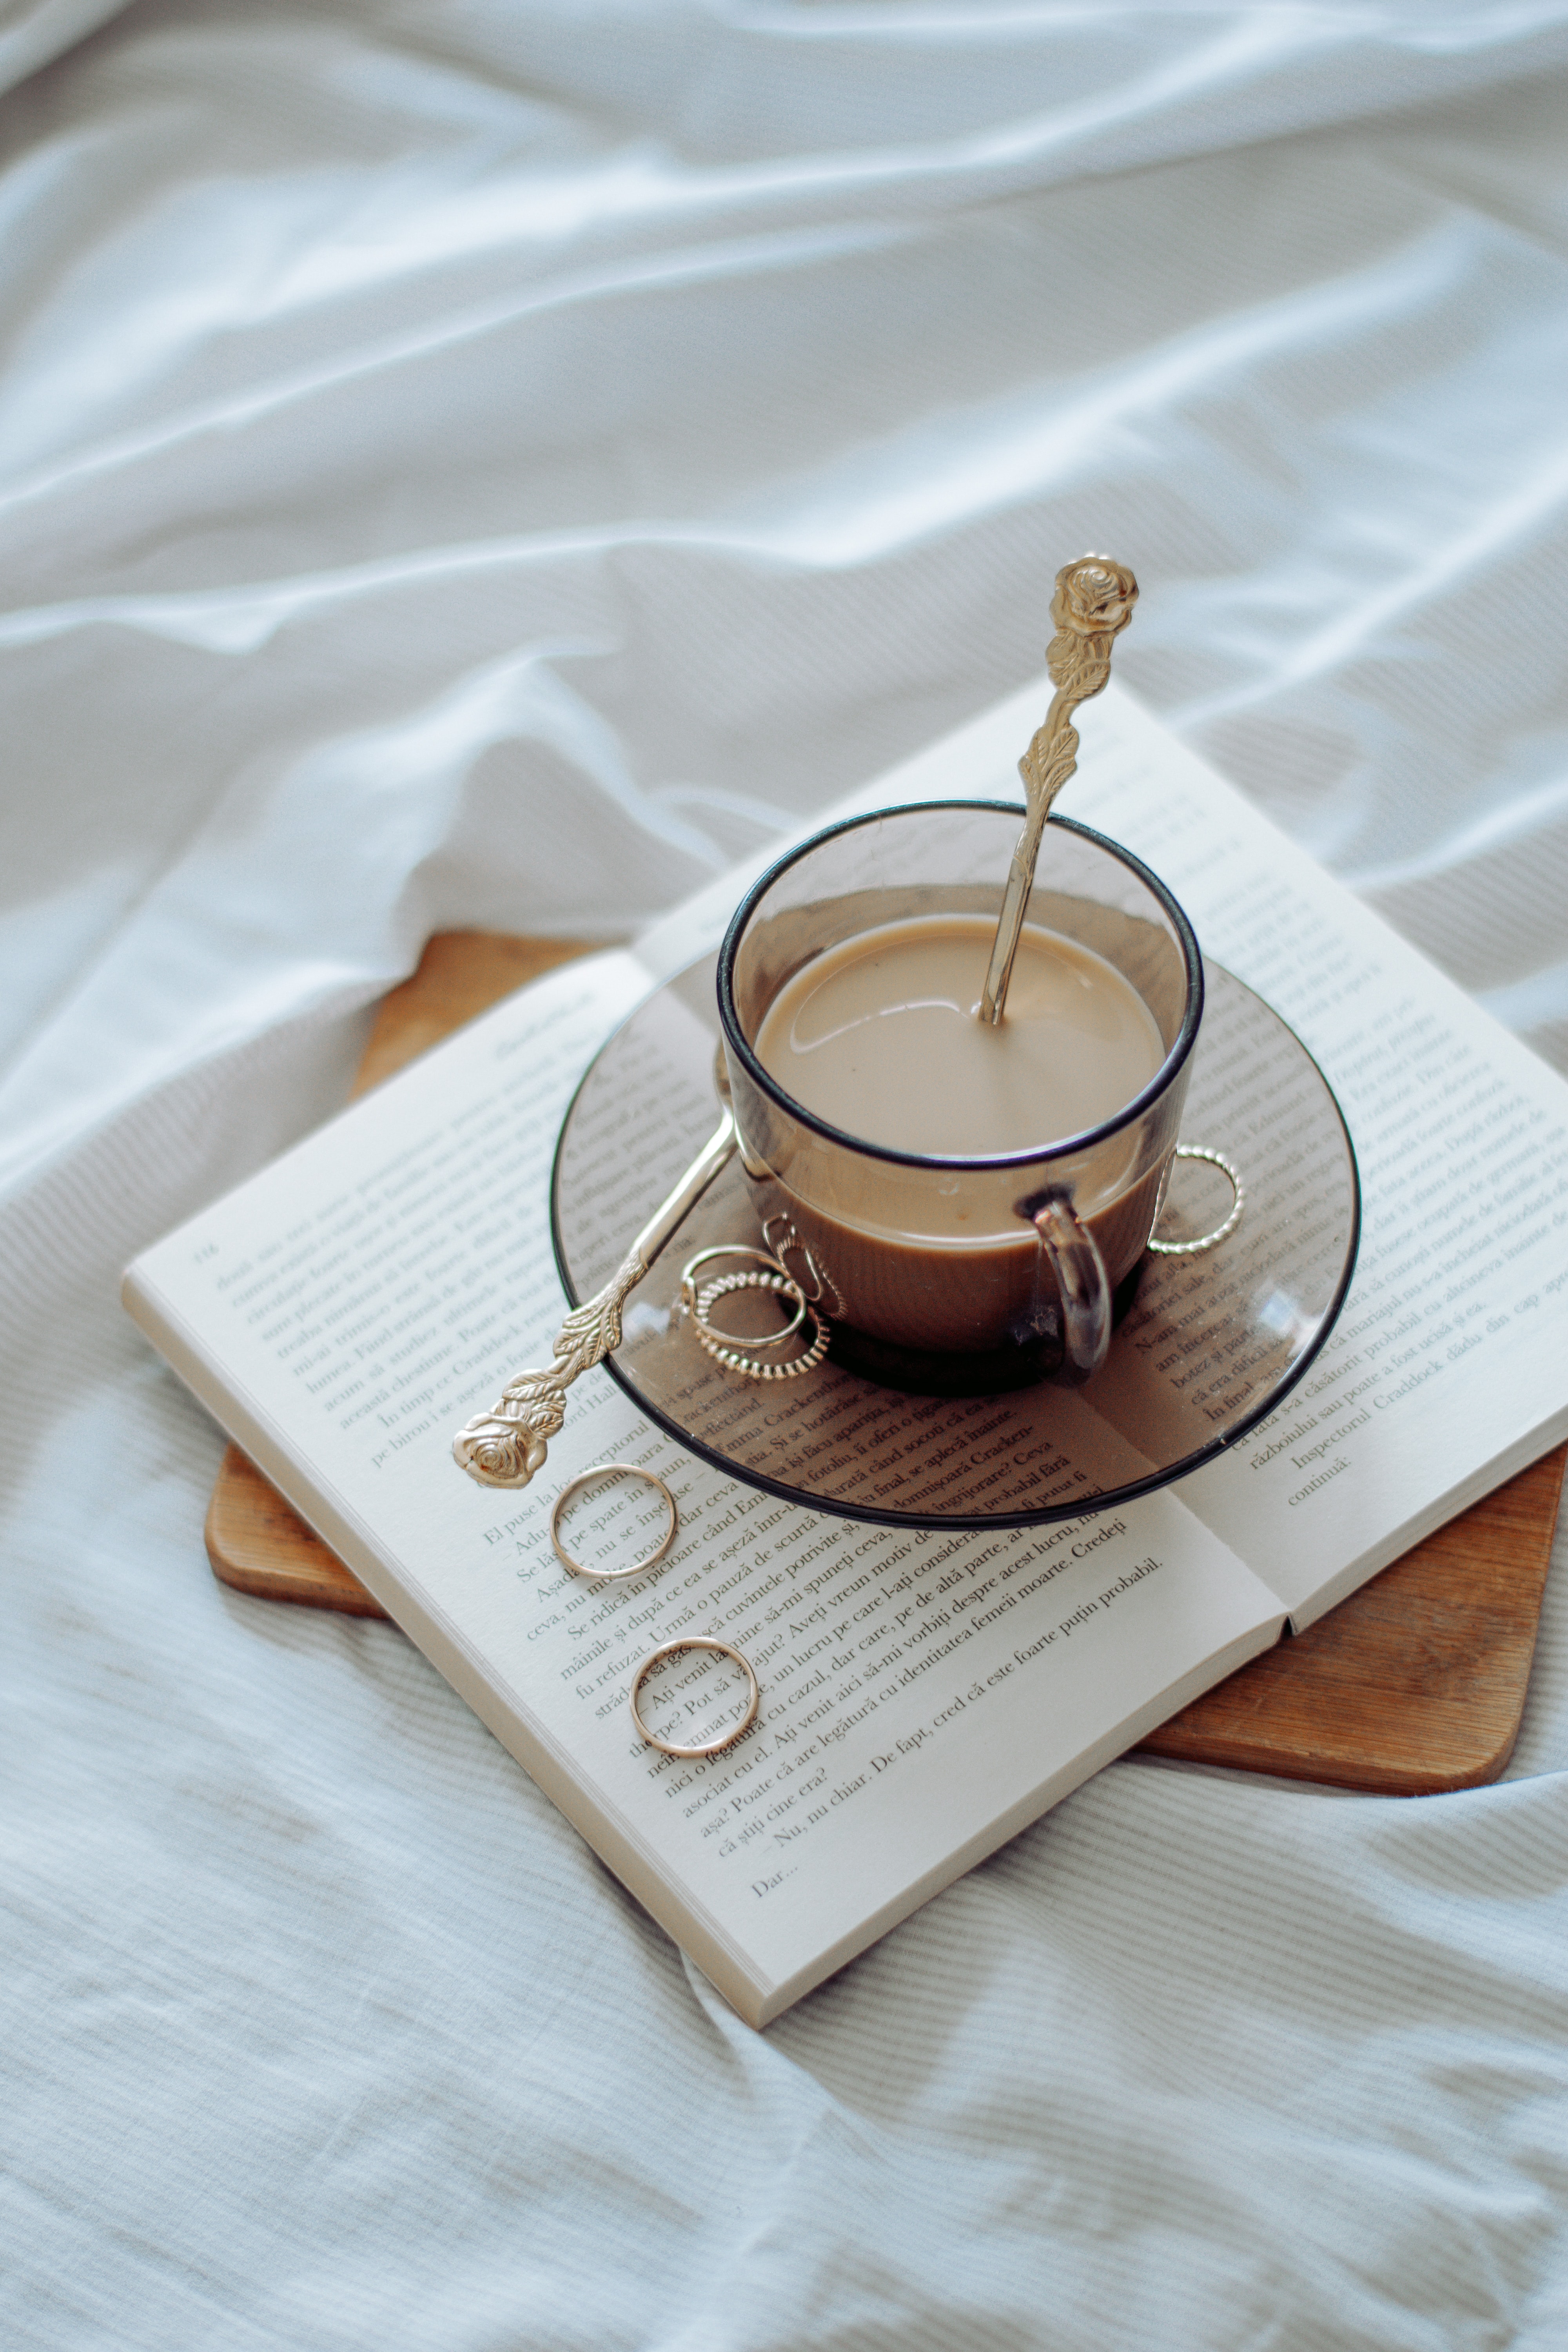 android miscellaneous, rings, coffee, miscellanea, cup, cloth, book